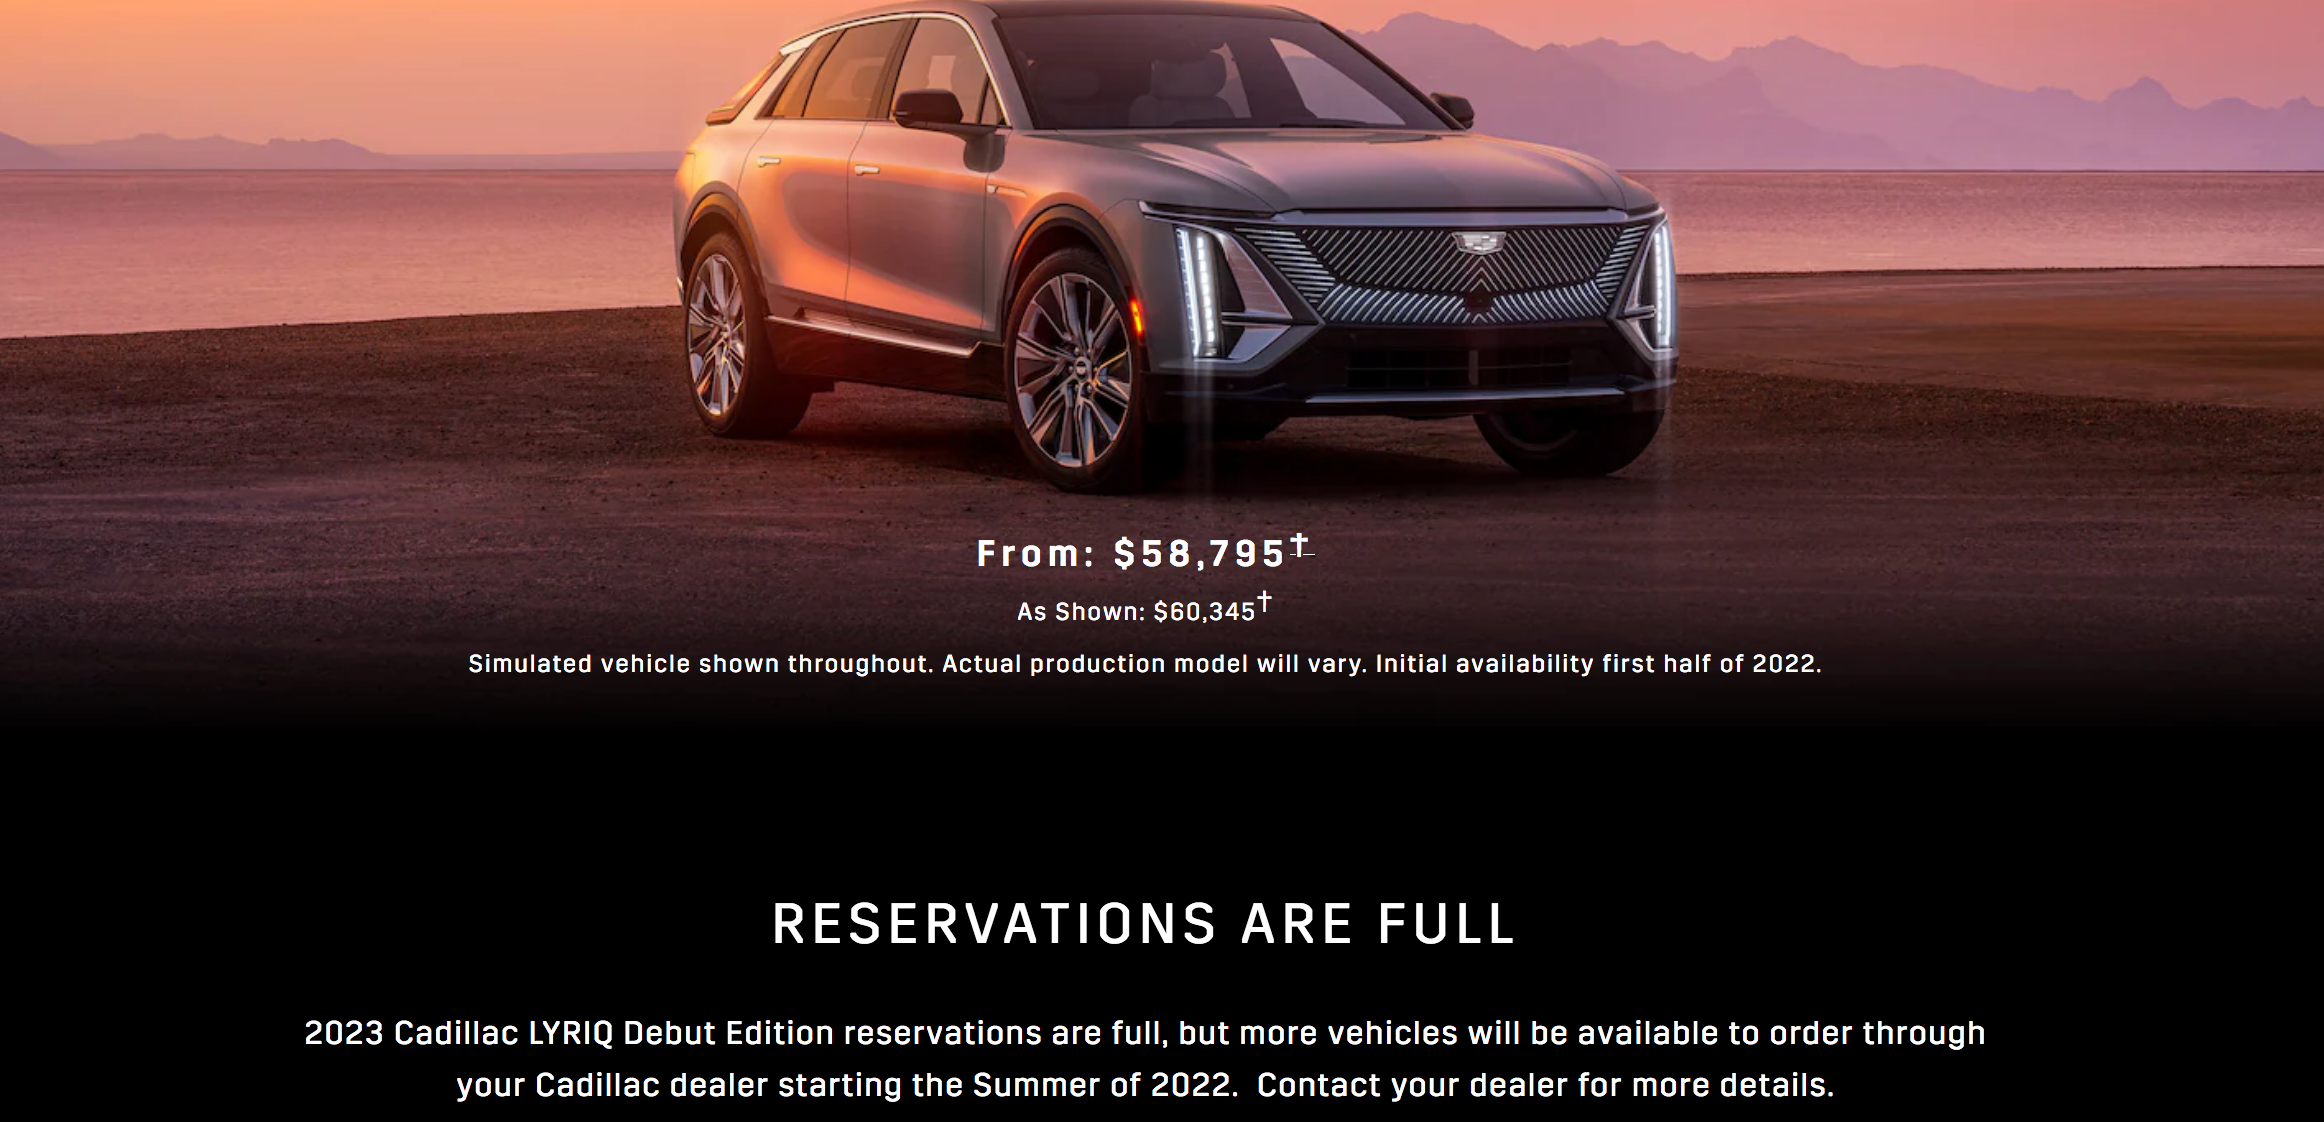 Cadillac Lyriq Debut Edition sold out in less than 10 minutes